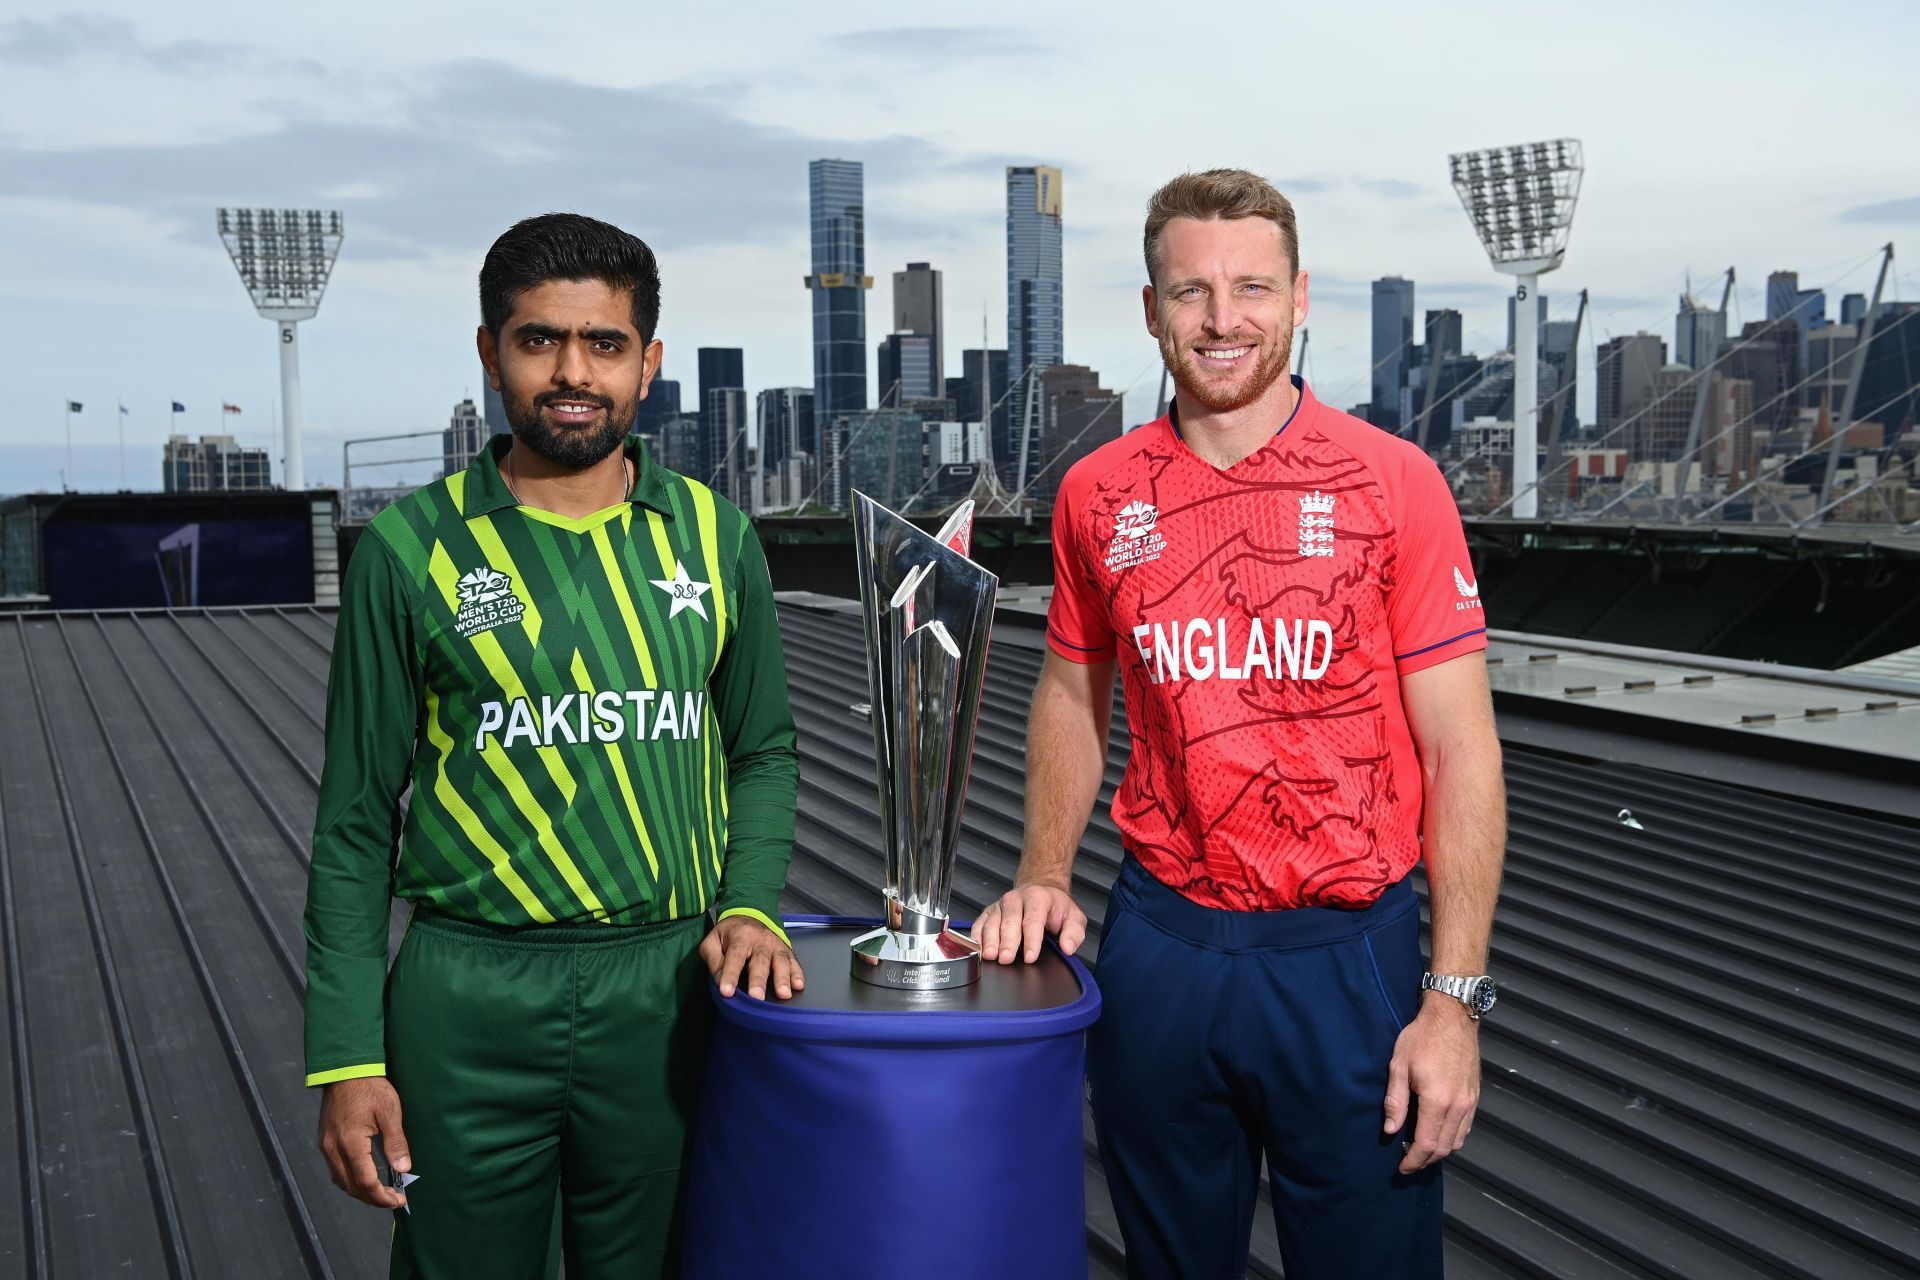 England will play Pakistan in the finals of the T20 World Cup 2022 [Pic Credit: ICC]